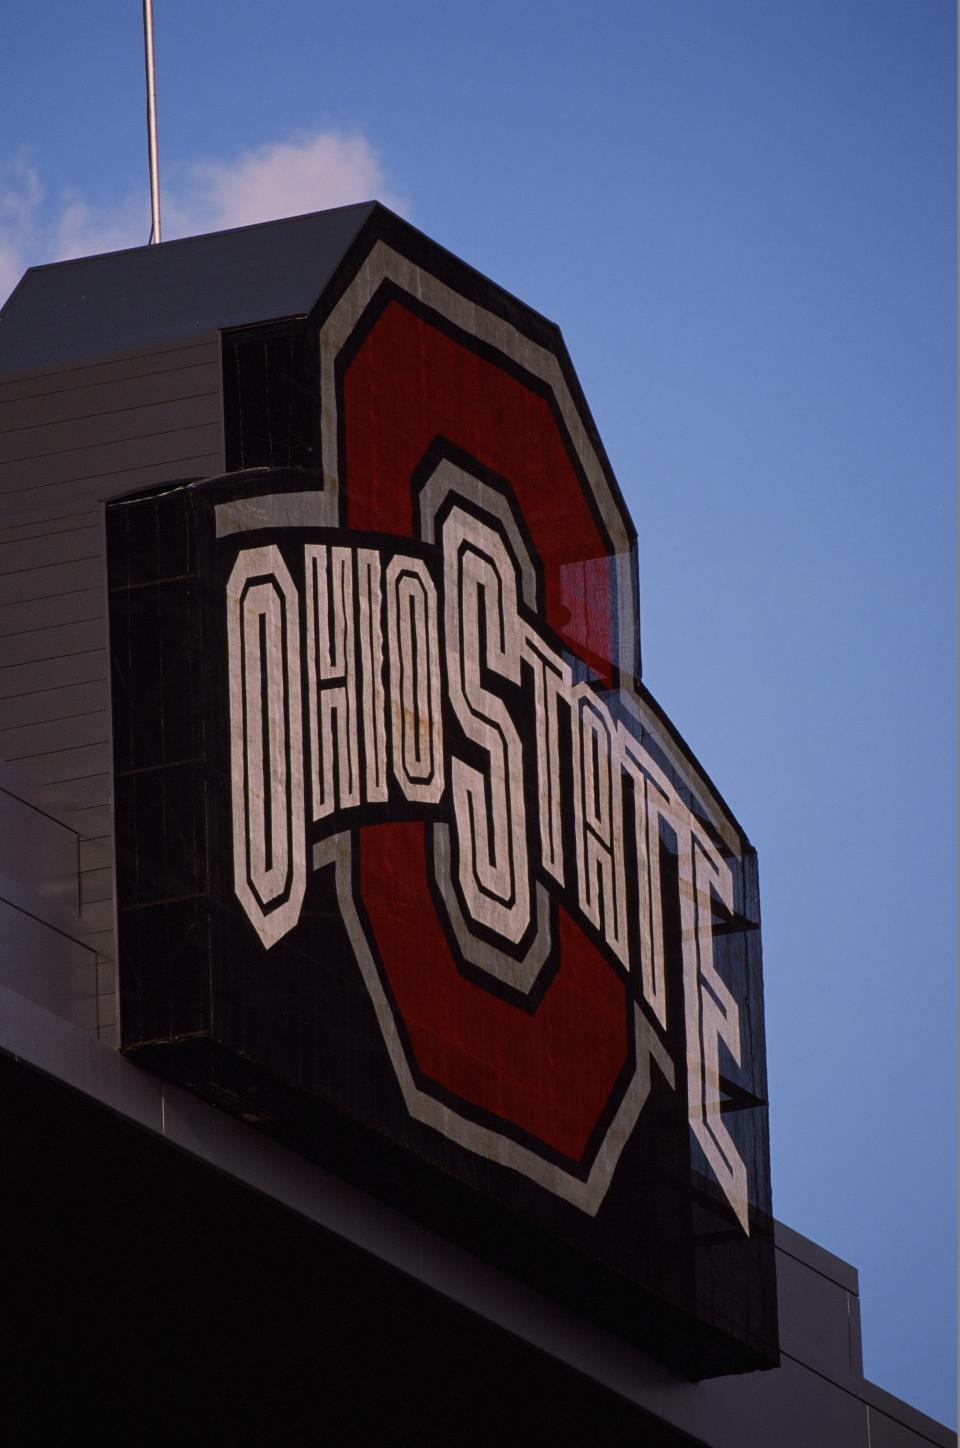 Ohio State University has recently been besieged by allegations of sexual misconduct relating to its athletics programs, from wrestling to diving. (Photo: Getty Images)